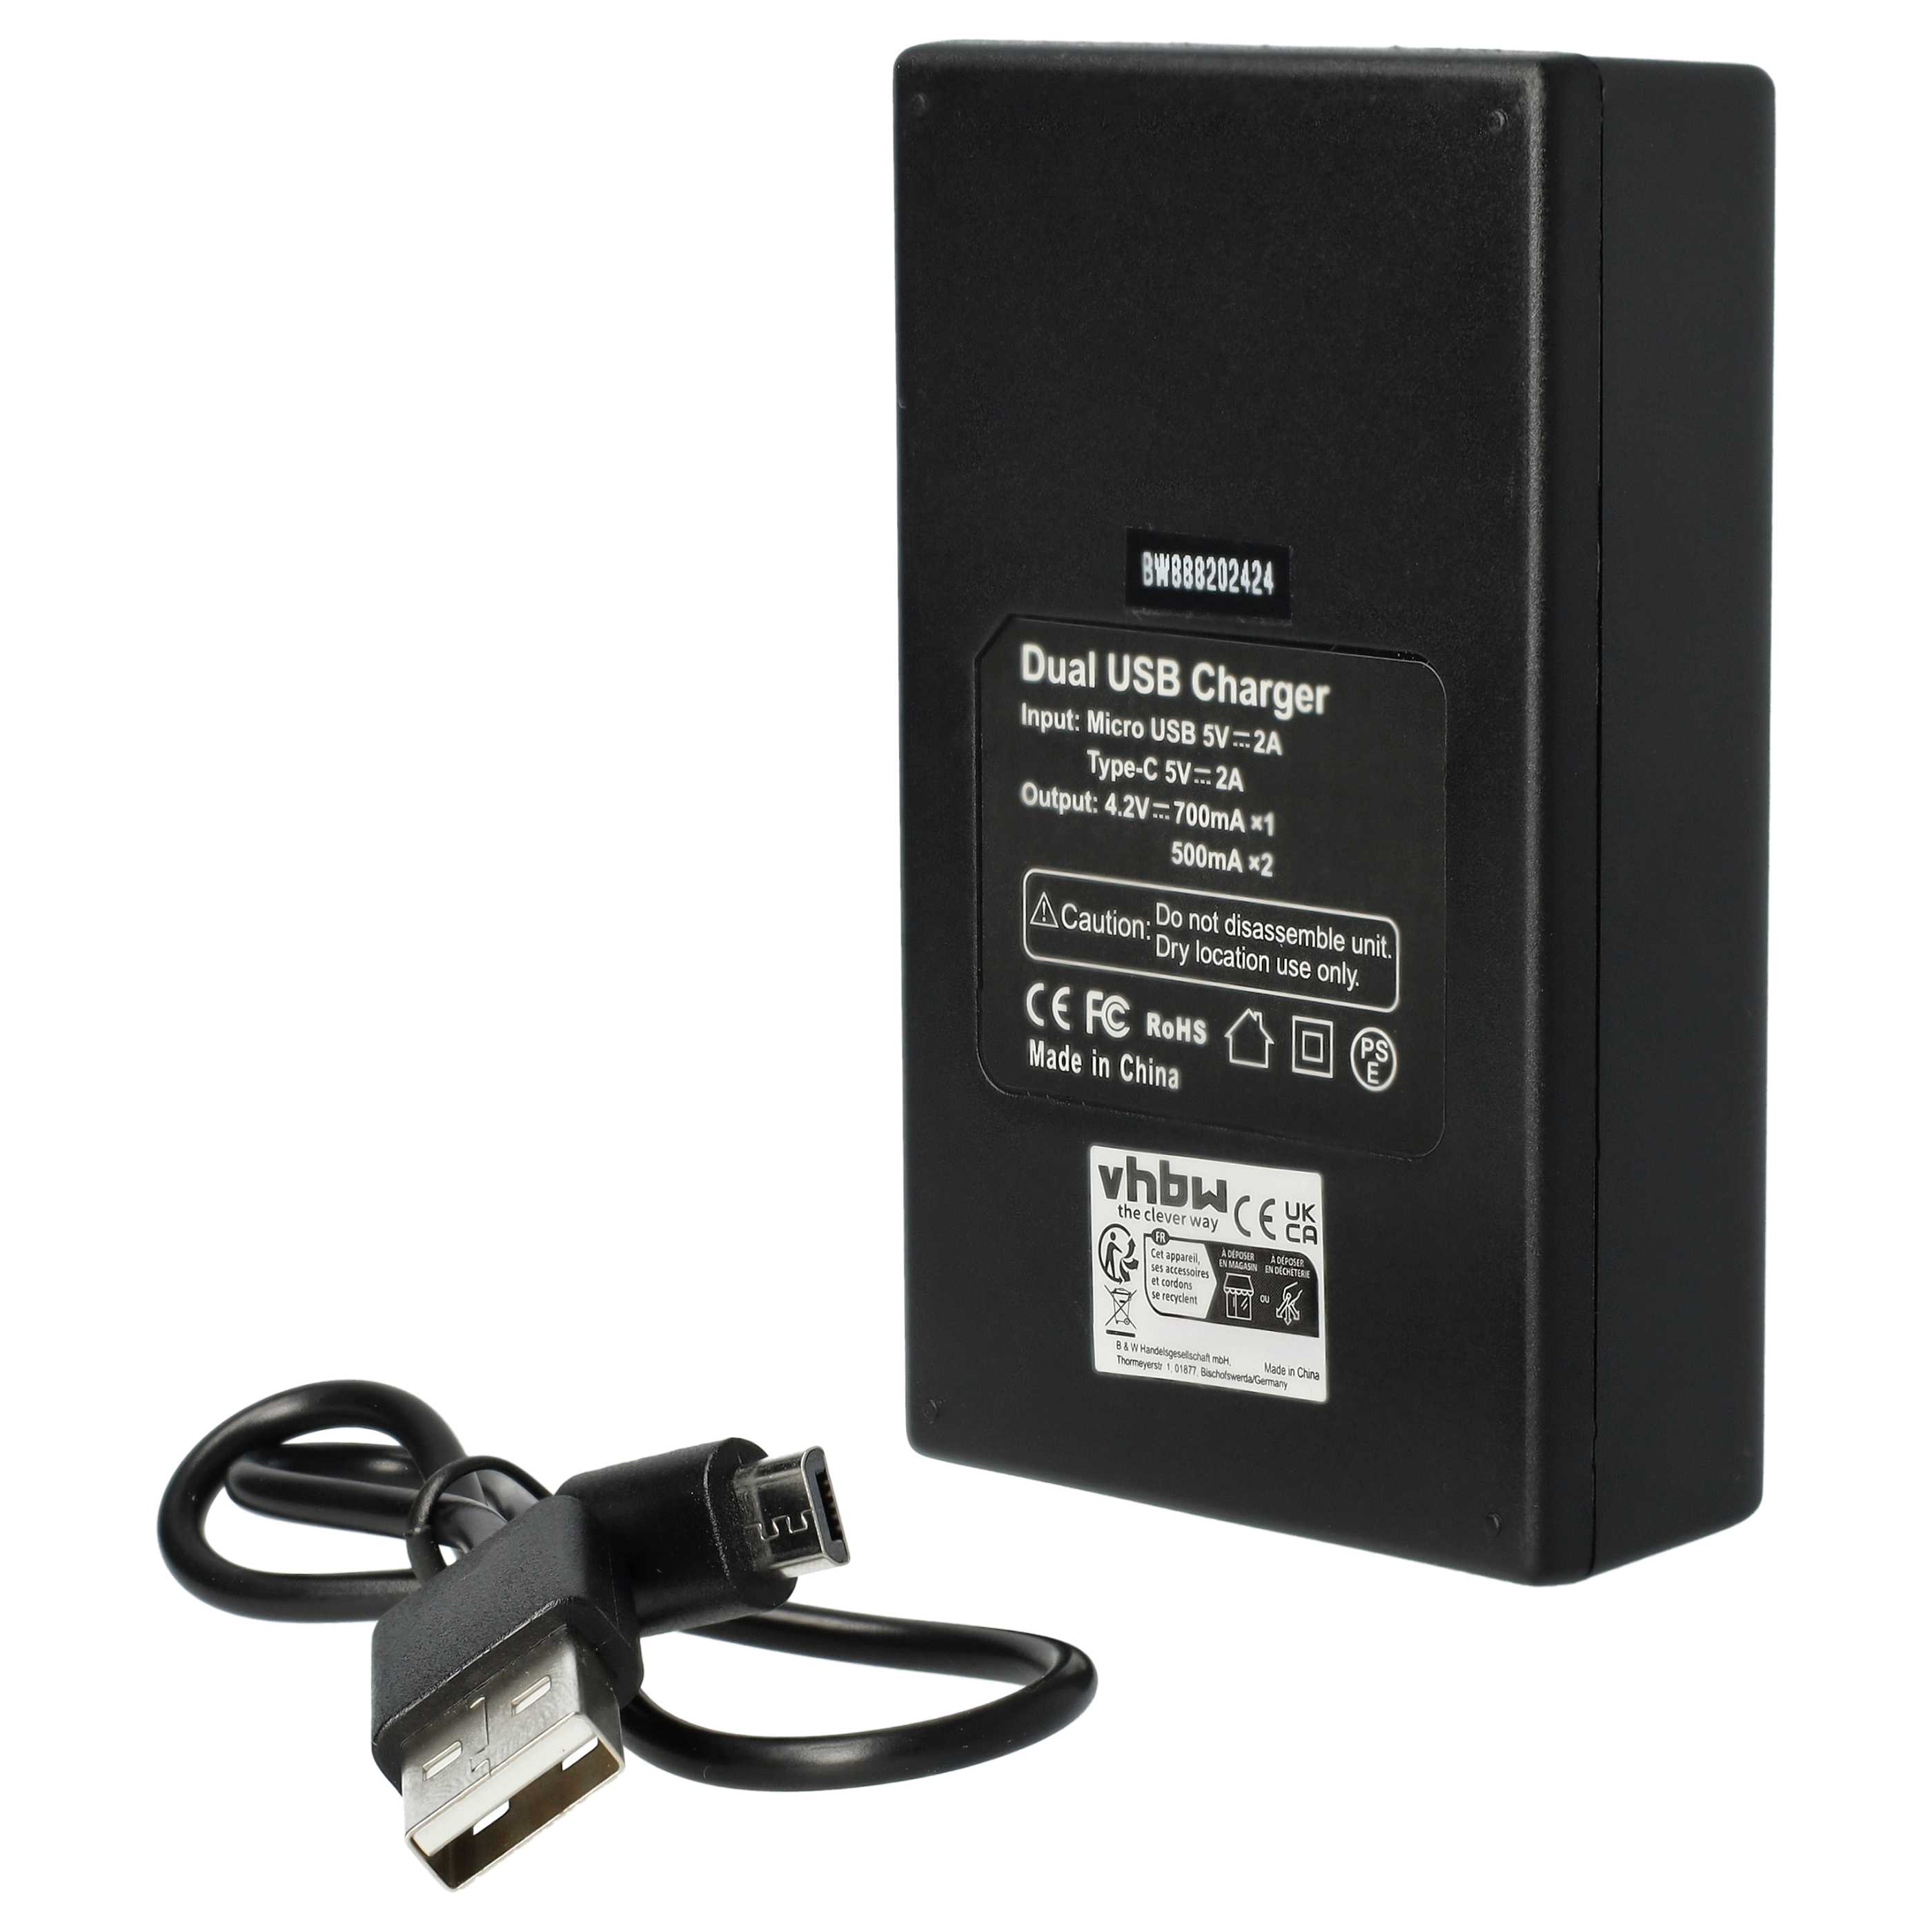 Battery Charger suitable for Canon BP-508 Camera etc. - 0.5 A, 8.4 V